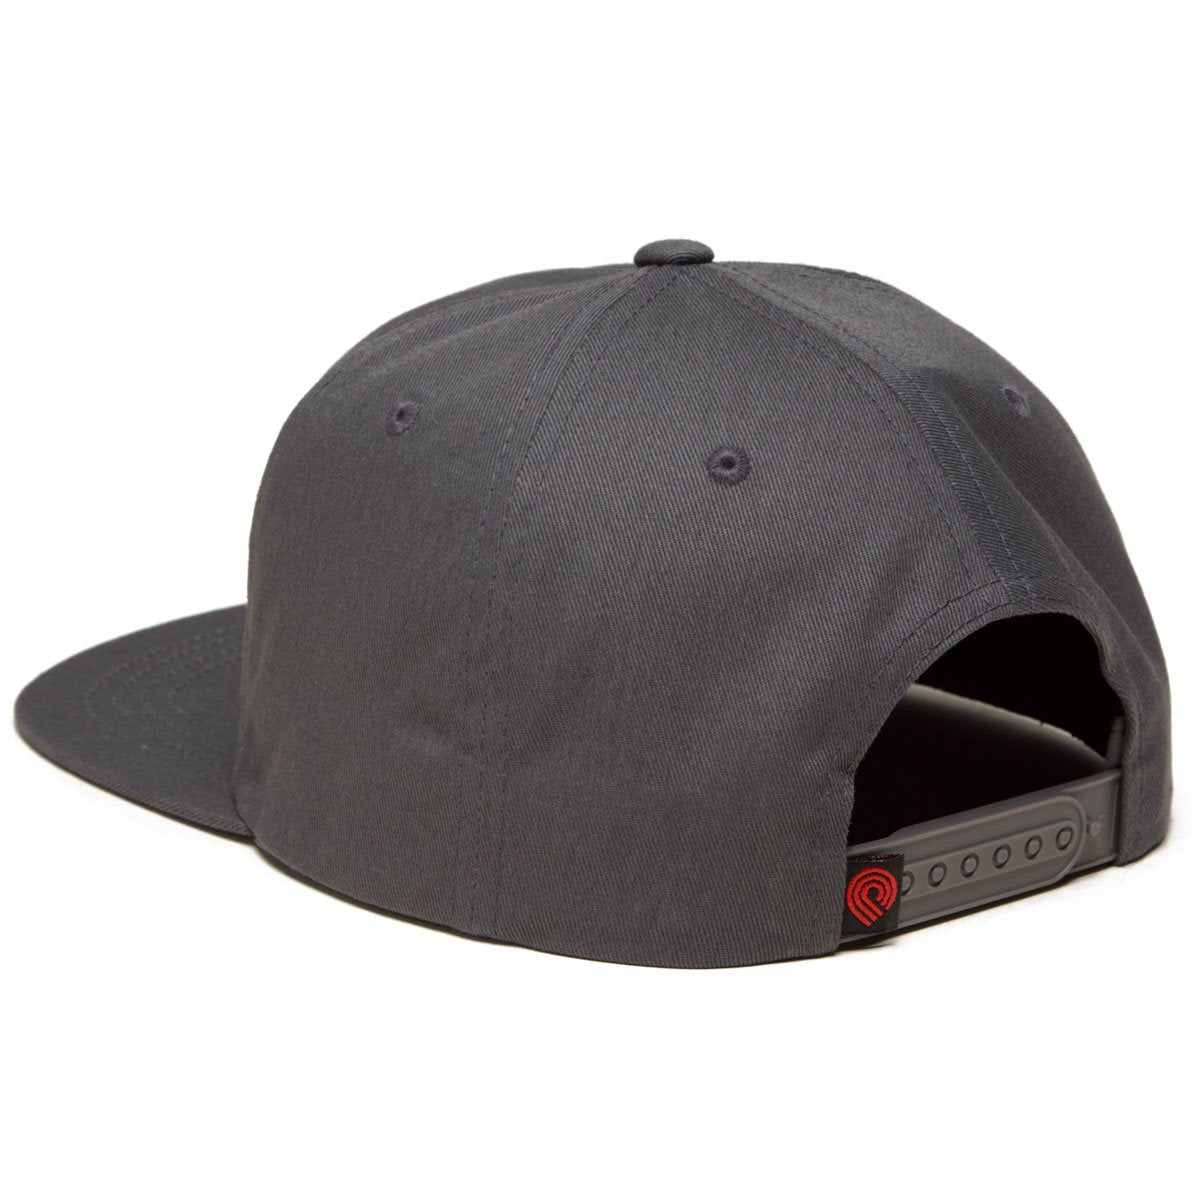 Powell-Peralta Winged Ripper Snapback Hat - Charcoal image 2